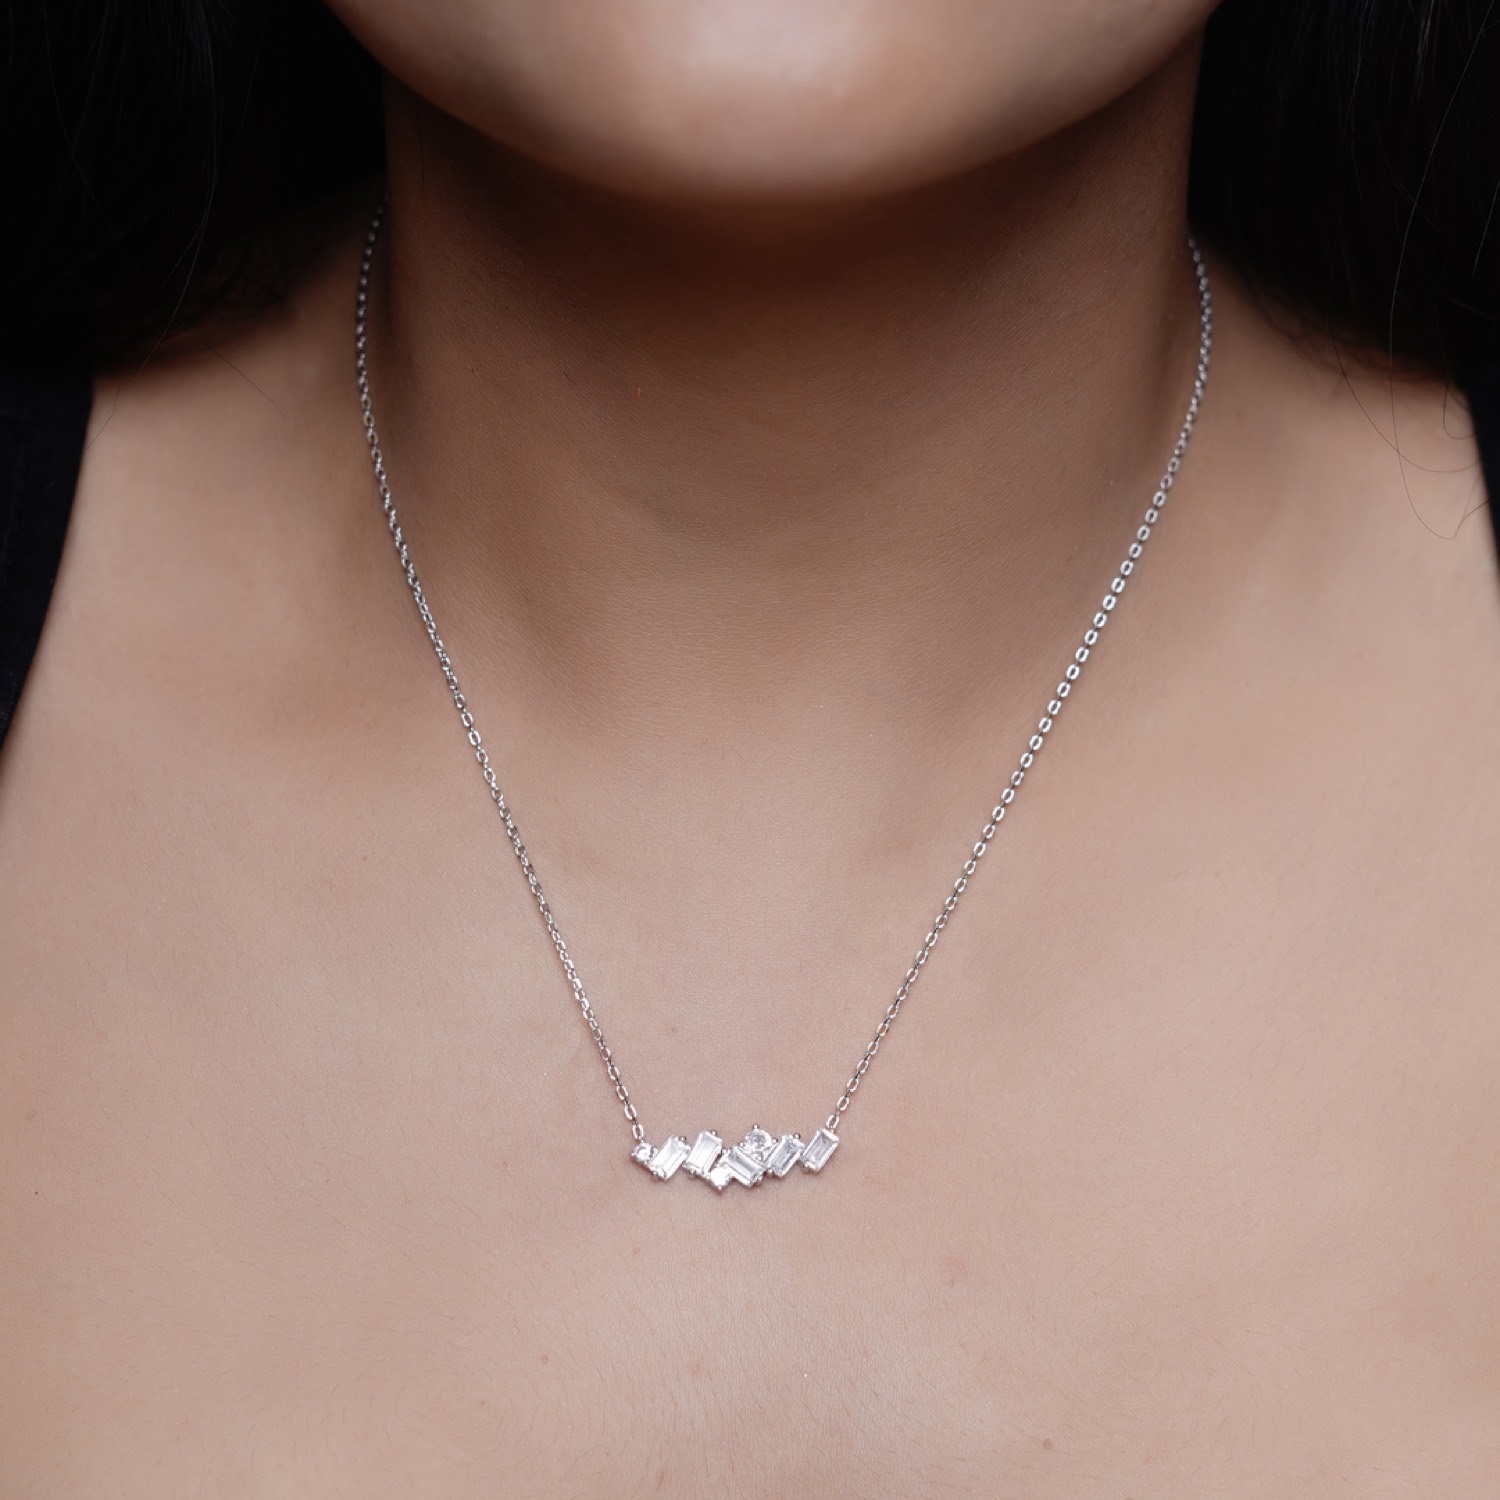 varam_chain_102022_baugette_and_round_cut_white_stone_bar_pendant_with_silver_chain_1-2